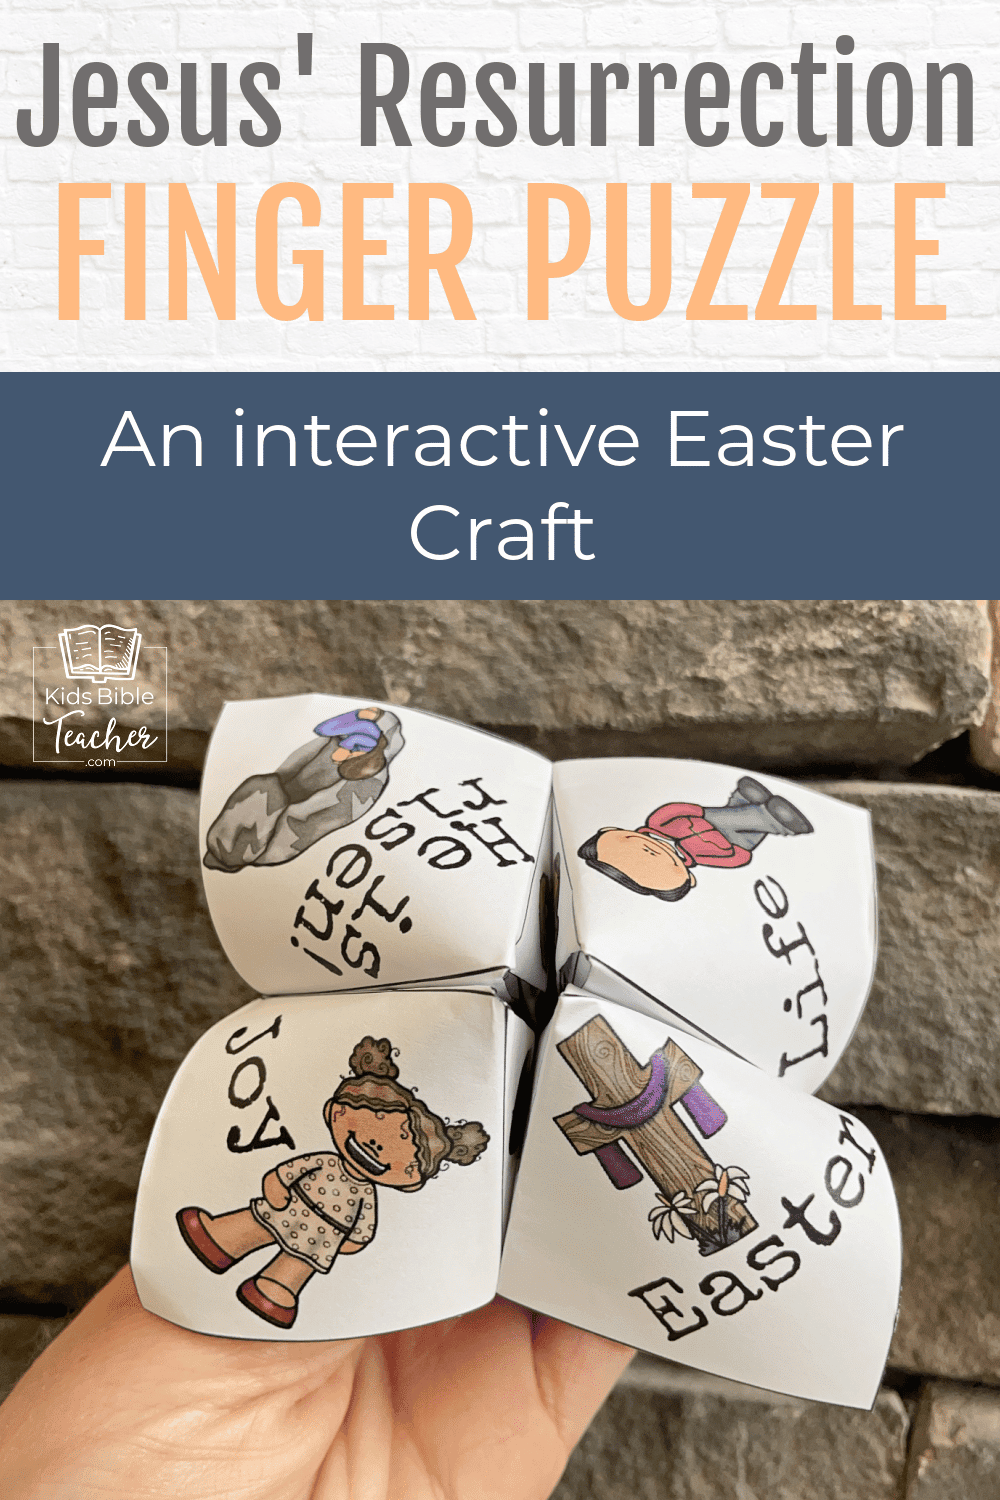 Help your kids learn the story of Jesus' resurrection with this interactive Easter Finger Puzzle - complete with Bible verses and questions!